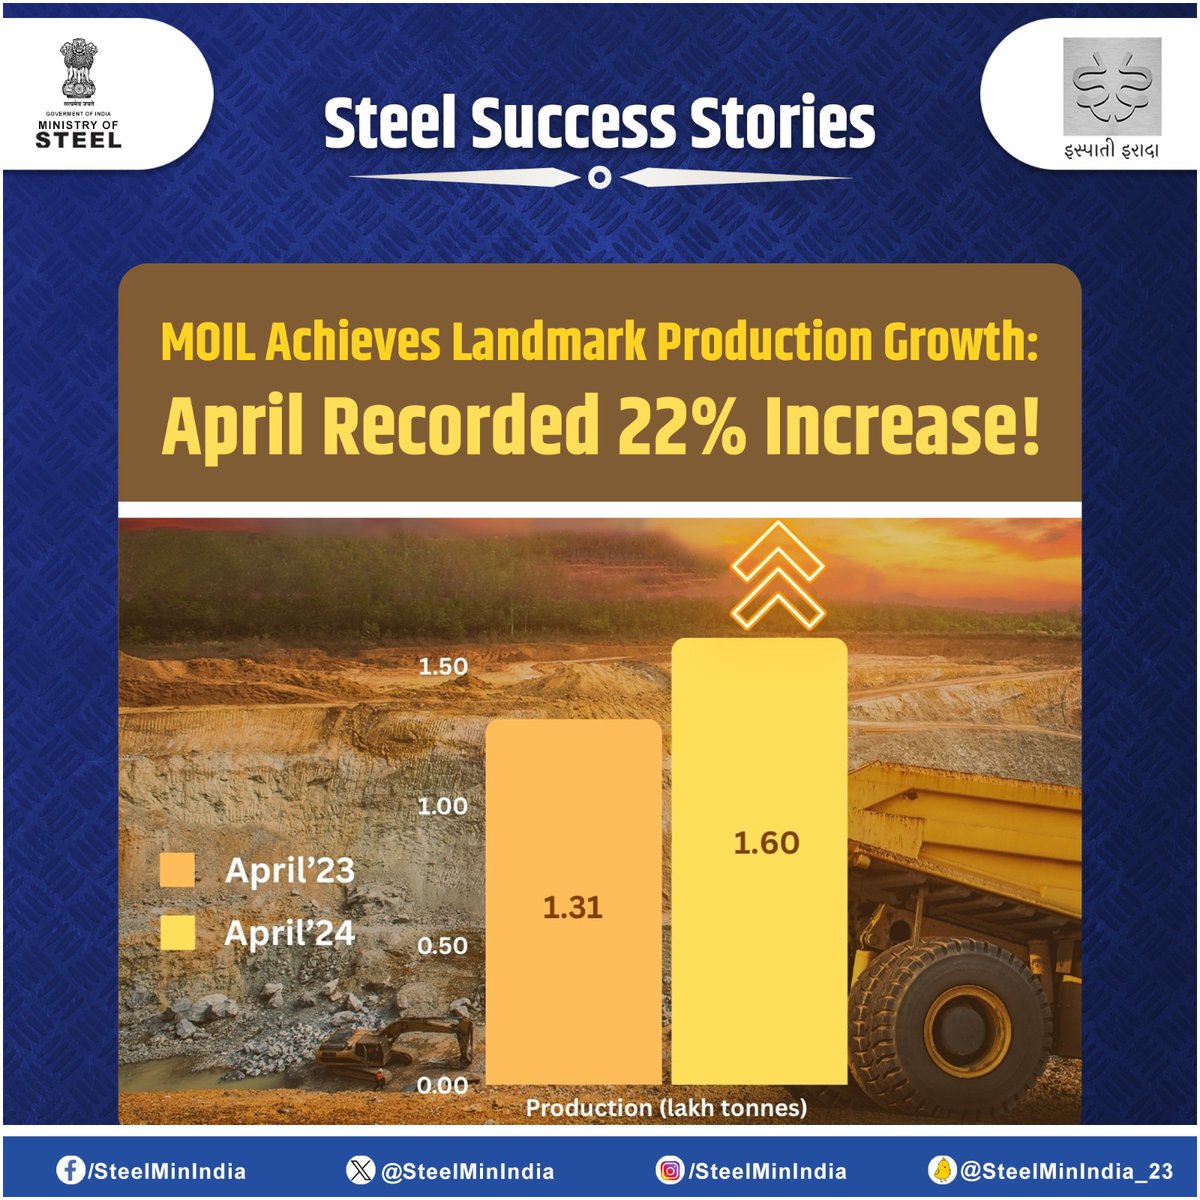 #BreakingBarriers in April 2024, @MOIL_LIMITED achieves a remarkable 22% increase in Production, setting new industry standards through relentless innovation!📈

#MOIL #ProductionGrowth #Innovation #SteelSuccessStories